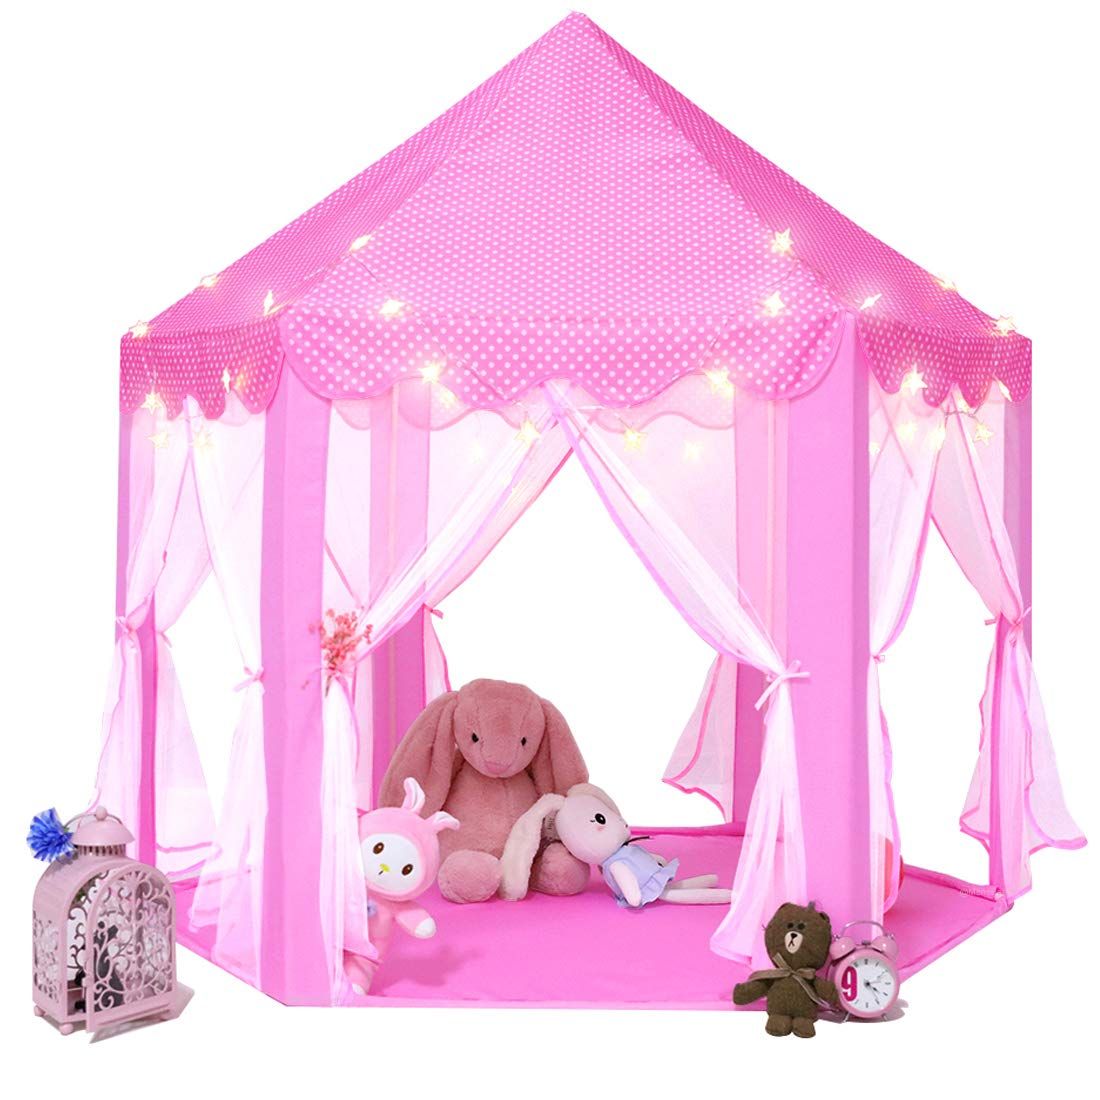 Monobeach Princess Tent Girls Large Playhouse Kids Castle Play Tent with Star Lights Toy for Childre | Amazon (US)